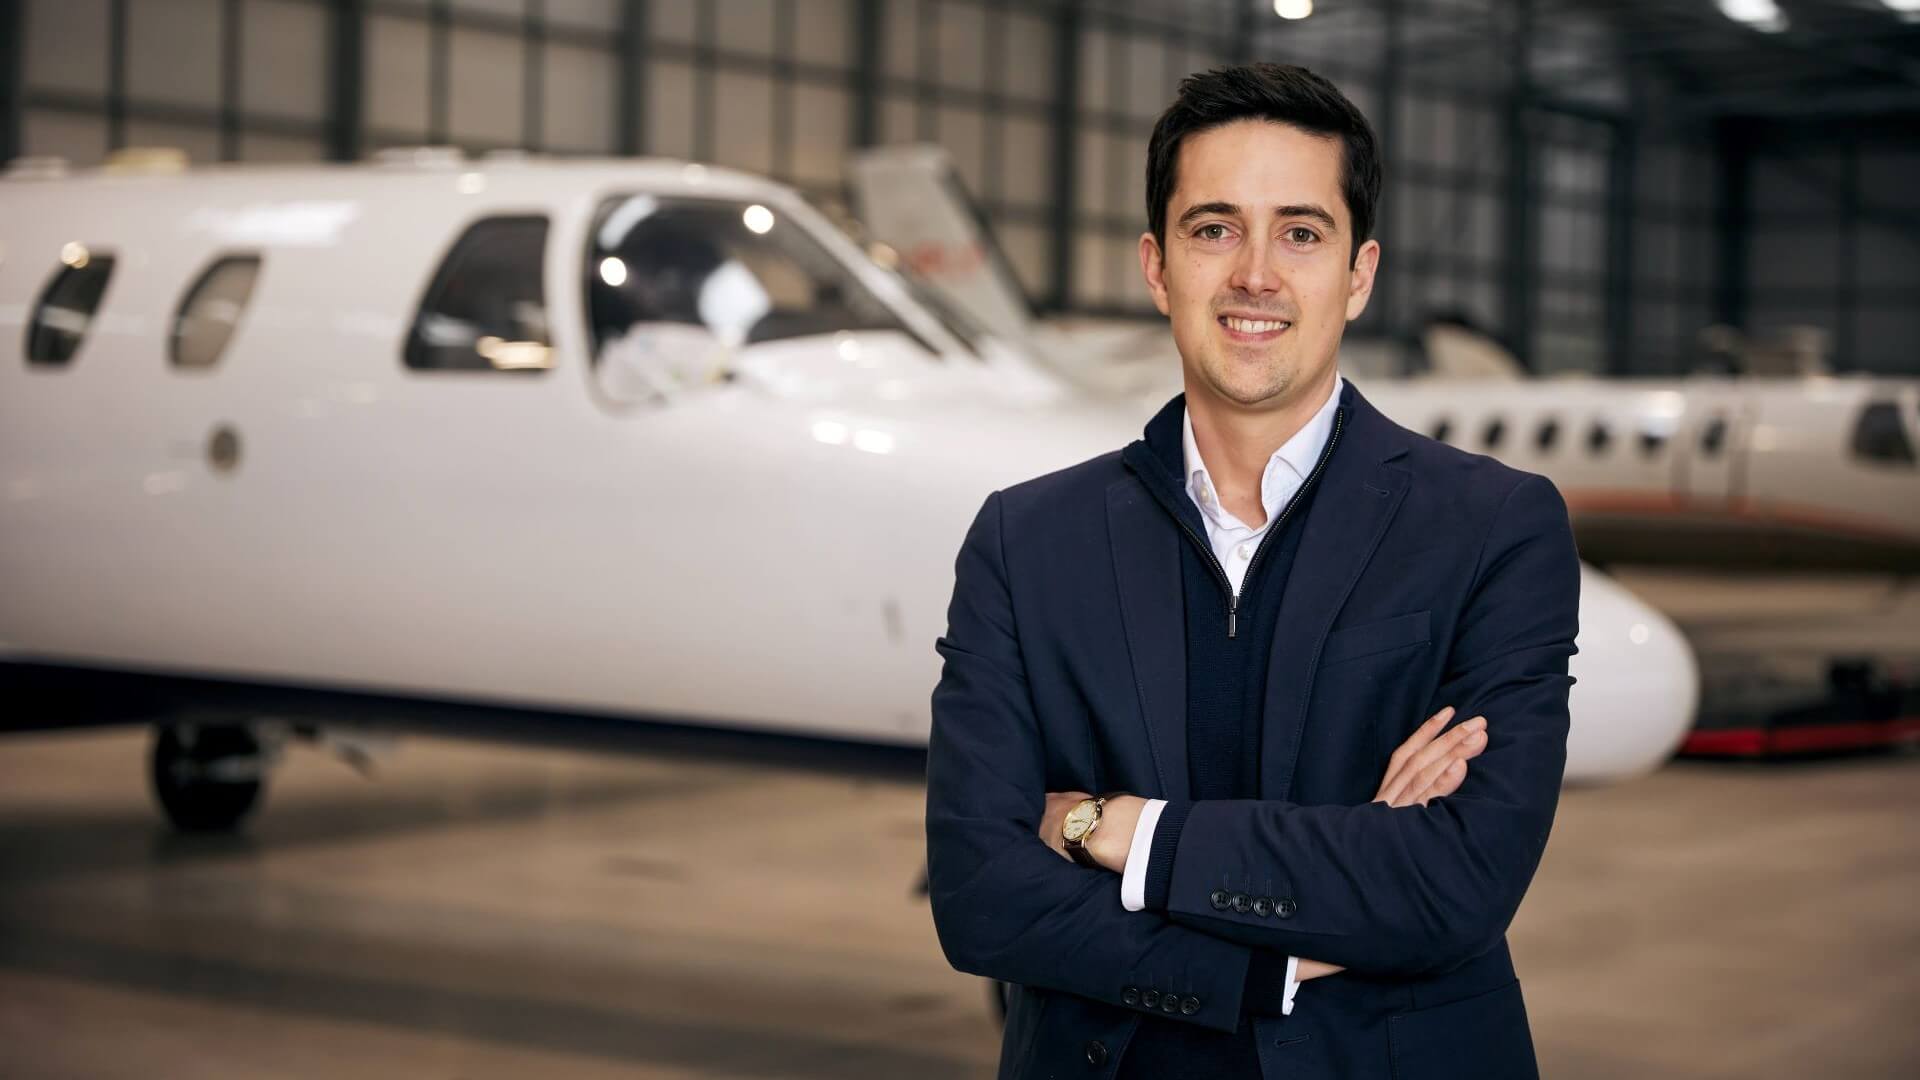 Head and shoulders photo of Andrew Symes, CEO of OXCCU with executive jet in background